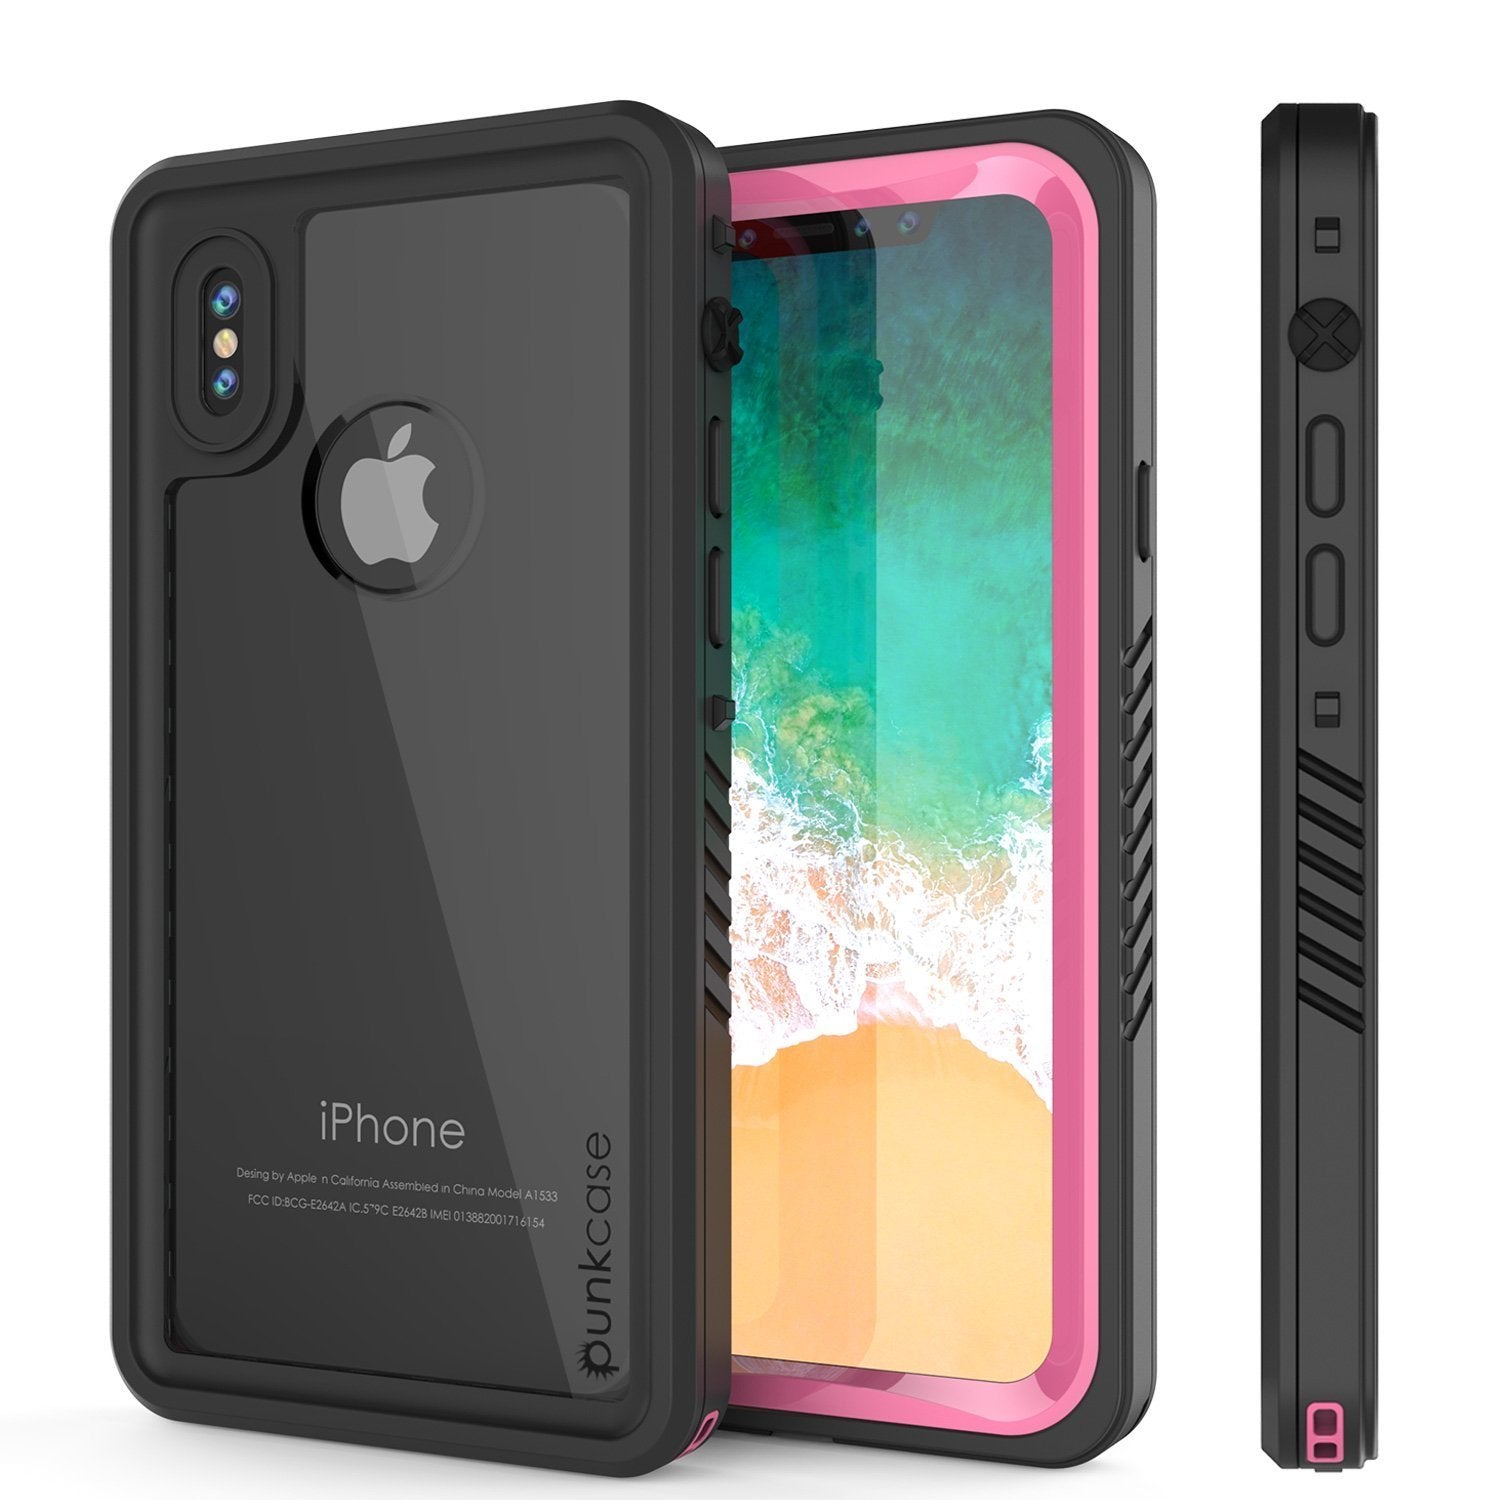 iPhone XS Max Waterproof Case, Punkcase [Extreme Series] Armor Cover W/ Built In Screen Protector [Pink] (Color in image: Pink)